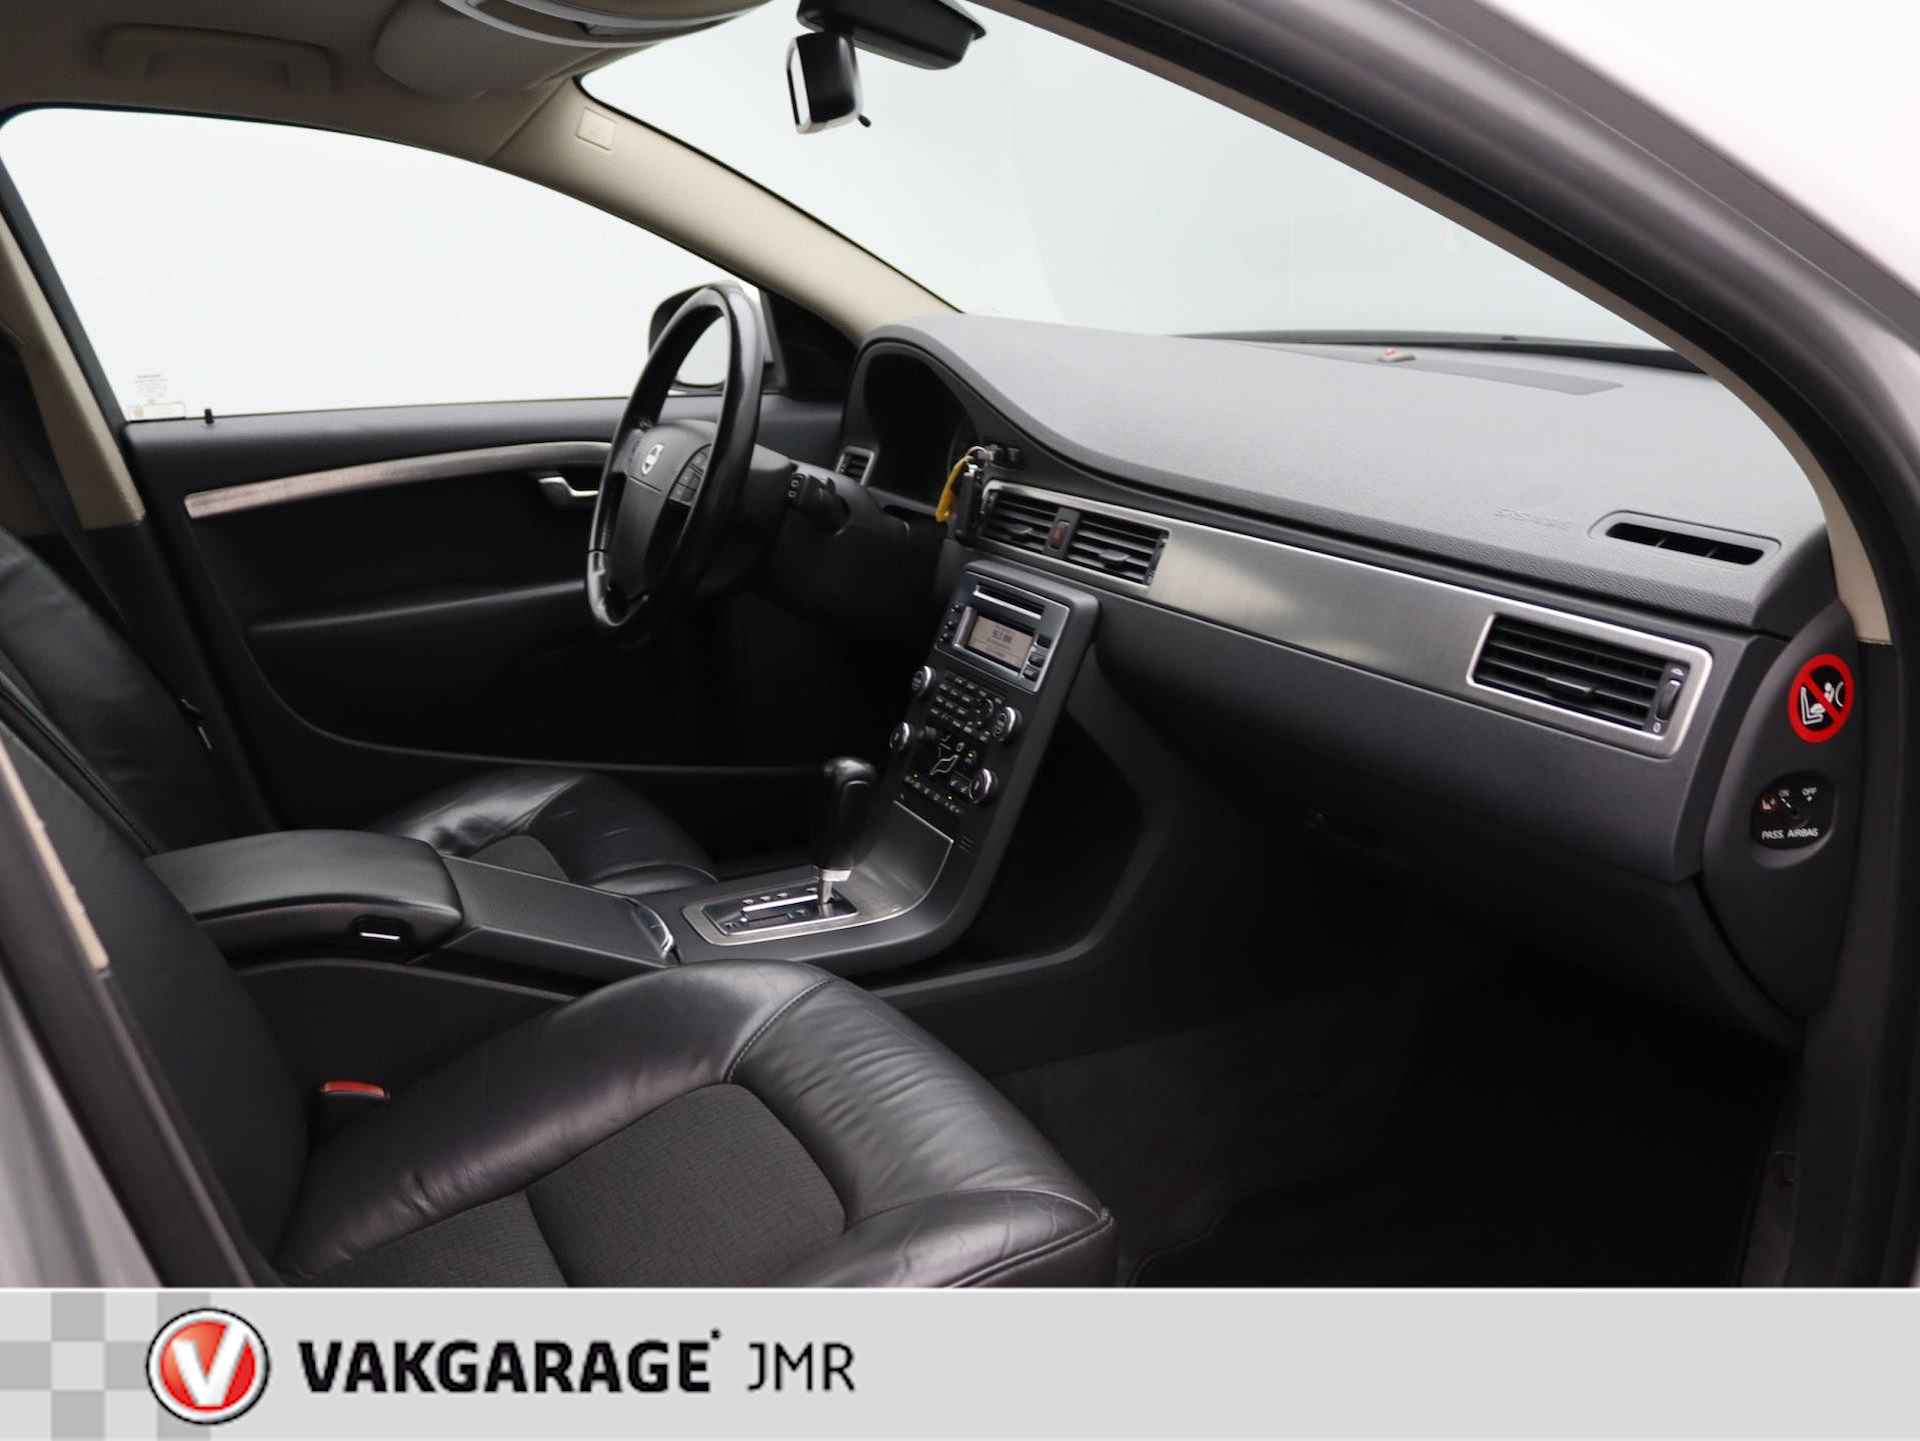 Volvo V70 2.5FT Momentum Youngtimer Trekhaak - PDC Achter - Stoel + Achterbank verwarming - Bluetooth - Climate en Cruise Control - 9/39